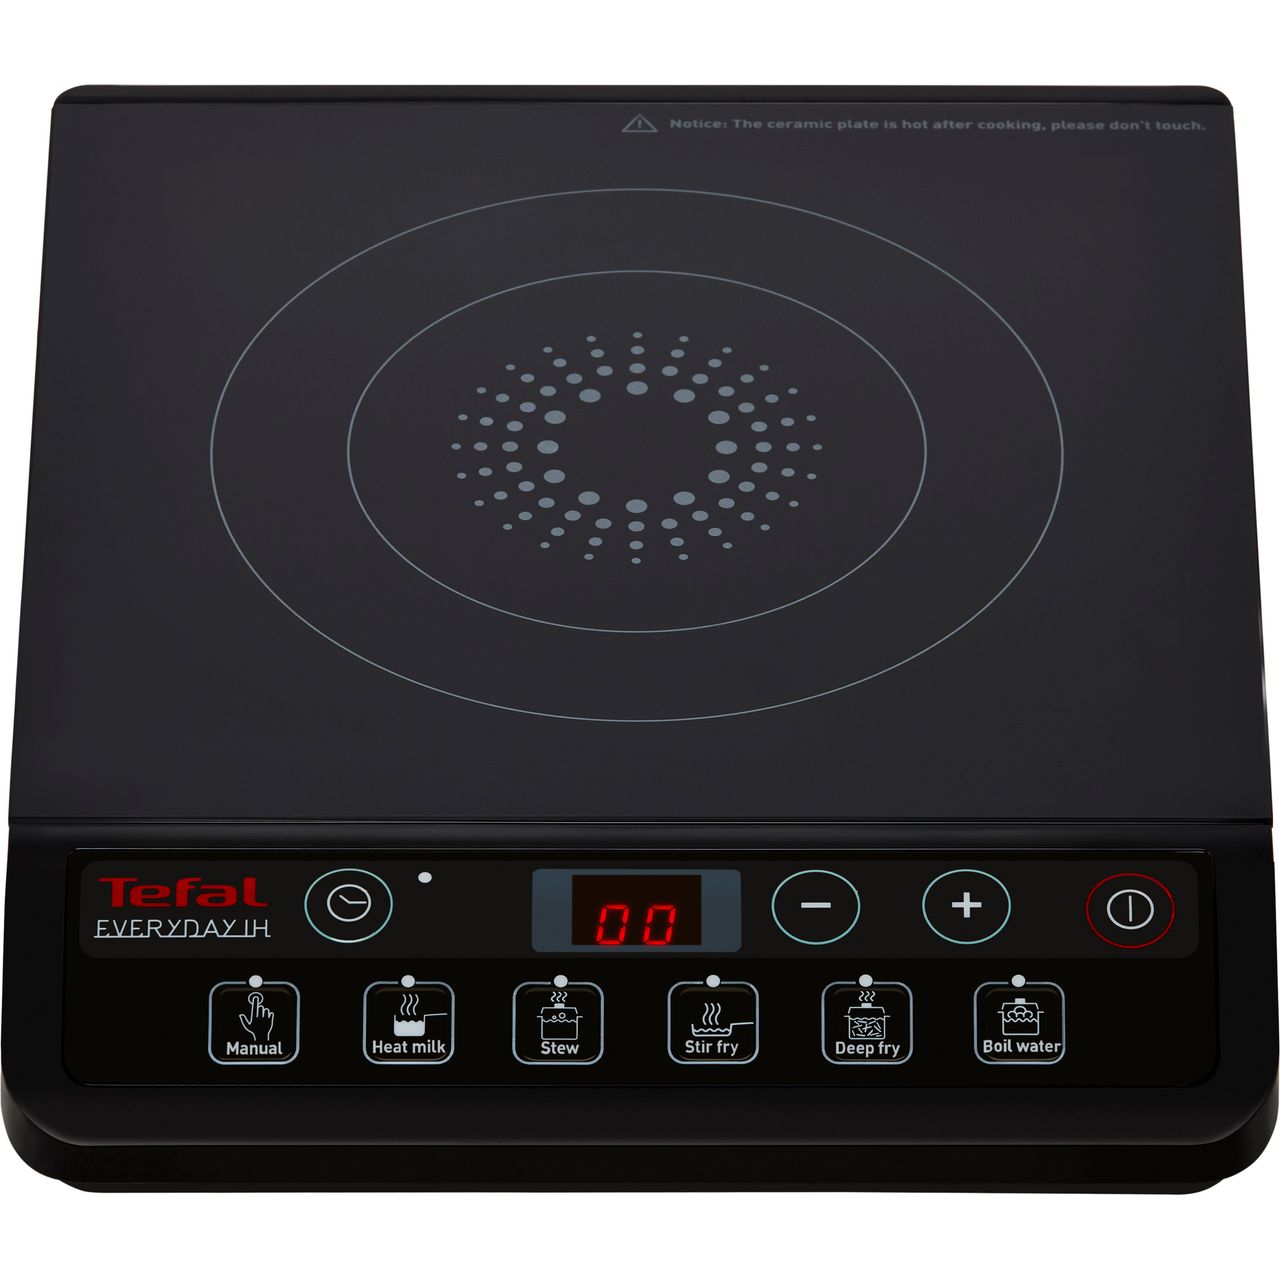 Tefal IH201840 Table Top Portable Ceramic Induction Hob 6